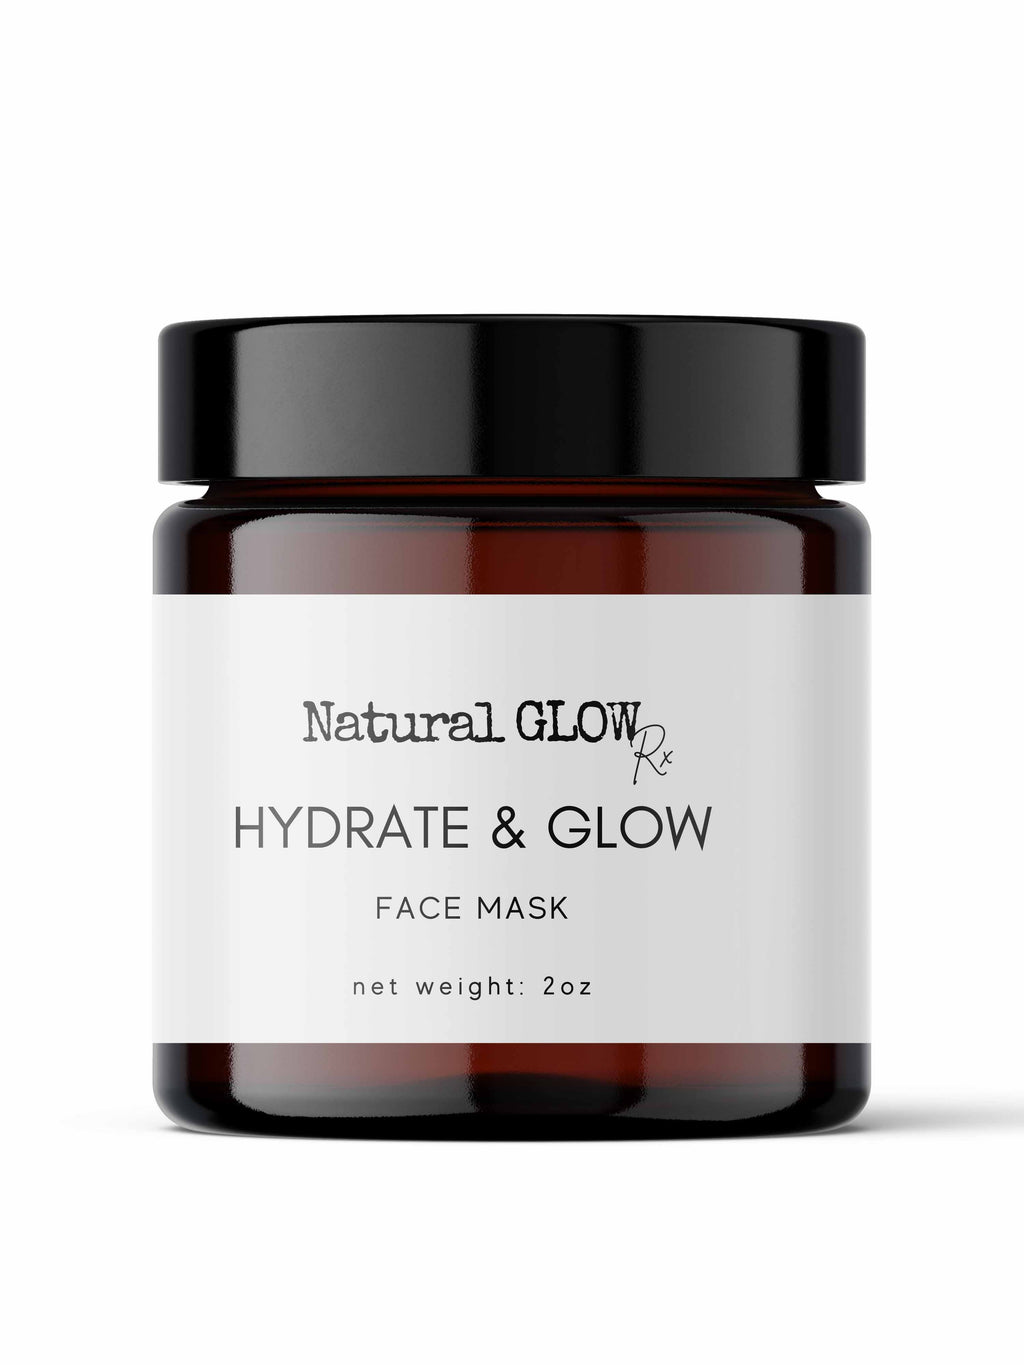 Hydrate & GLOW Face Mask